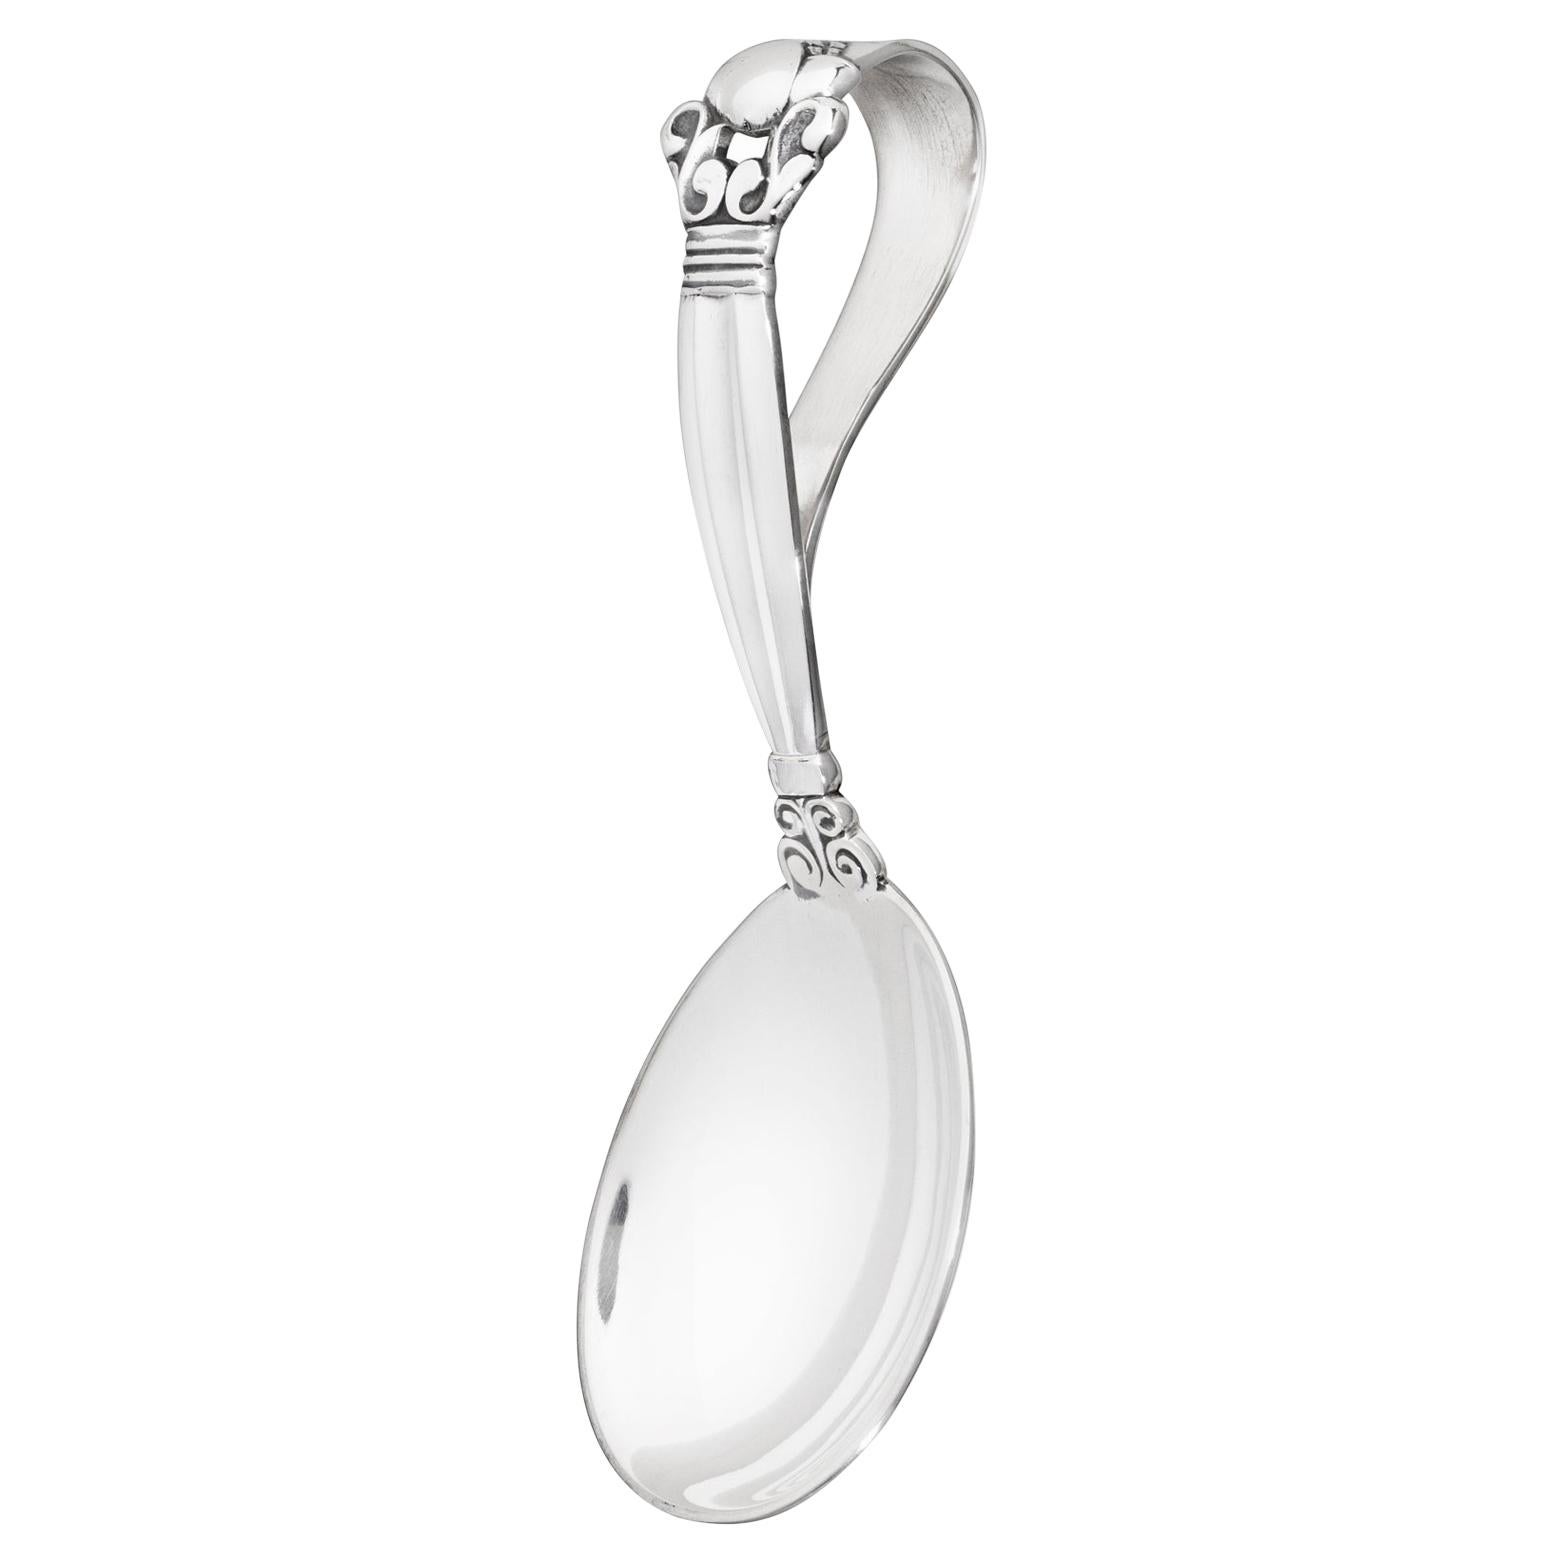 Georg Jensen Sterling Silver Acorn Curved Baby Spoon by Johan Rohde For Sale